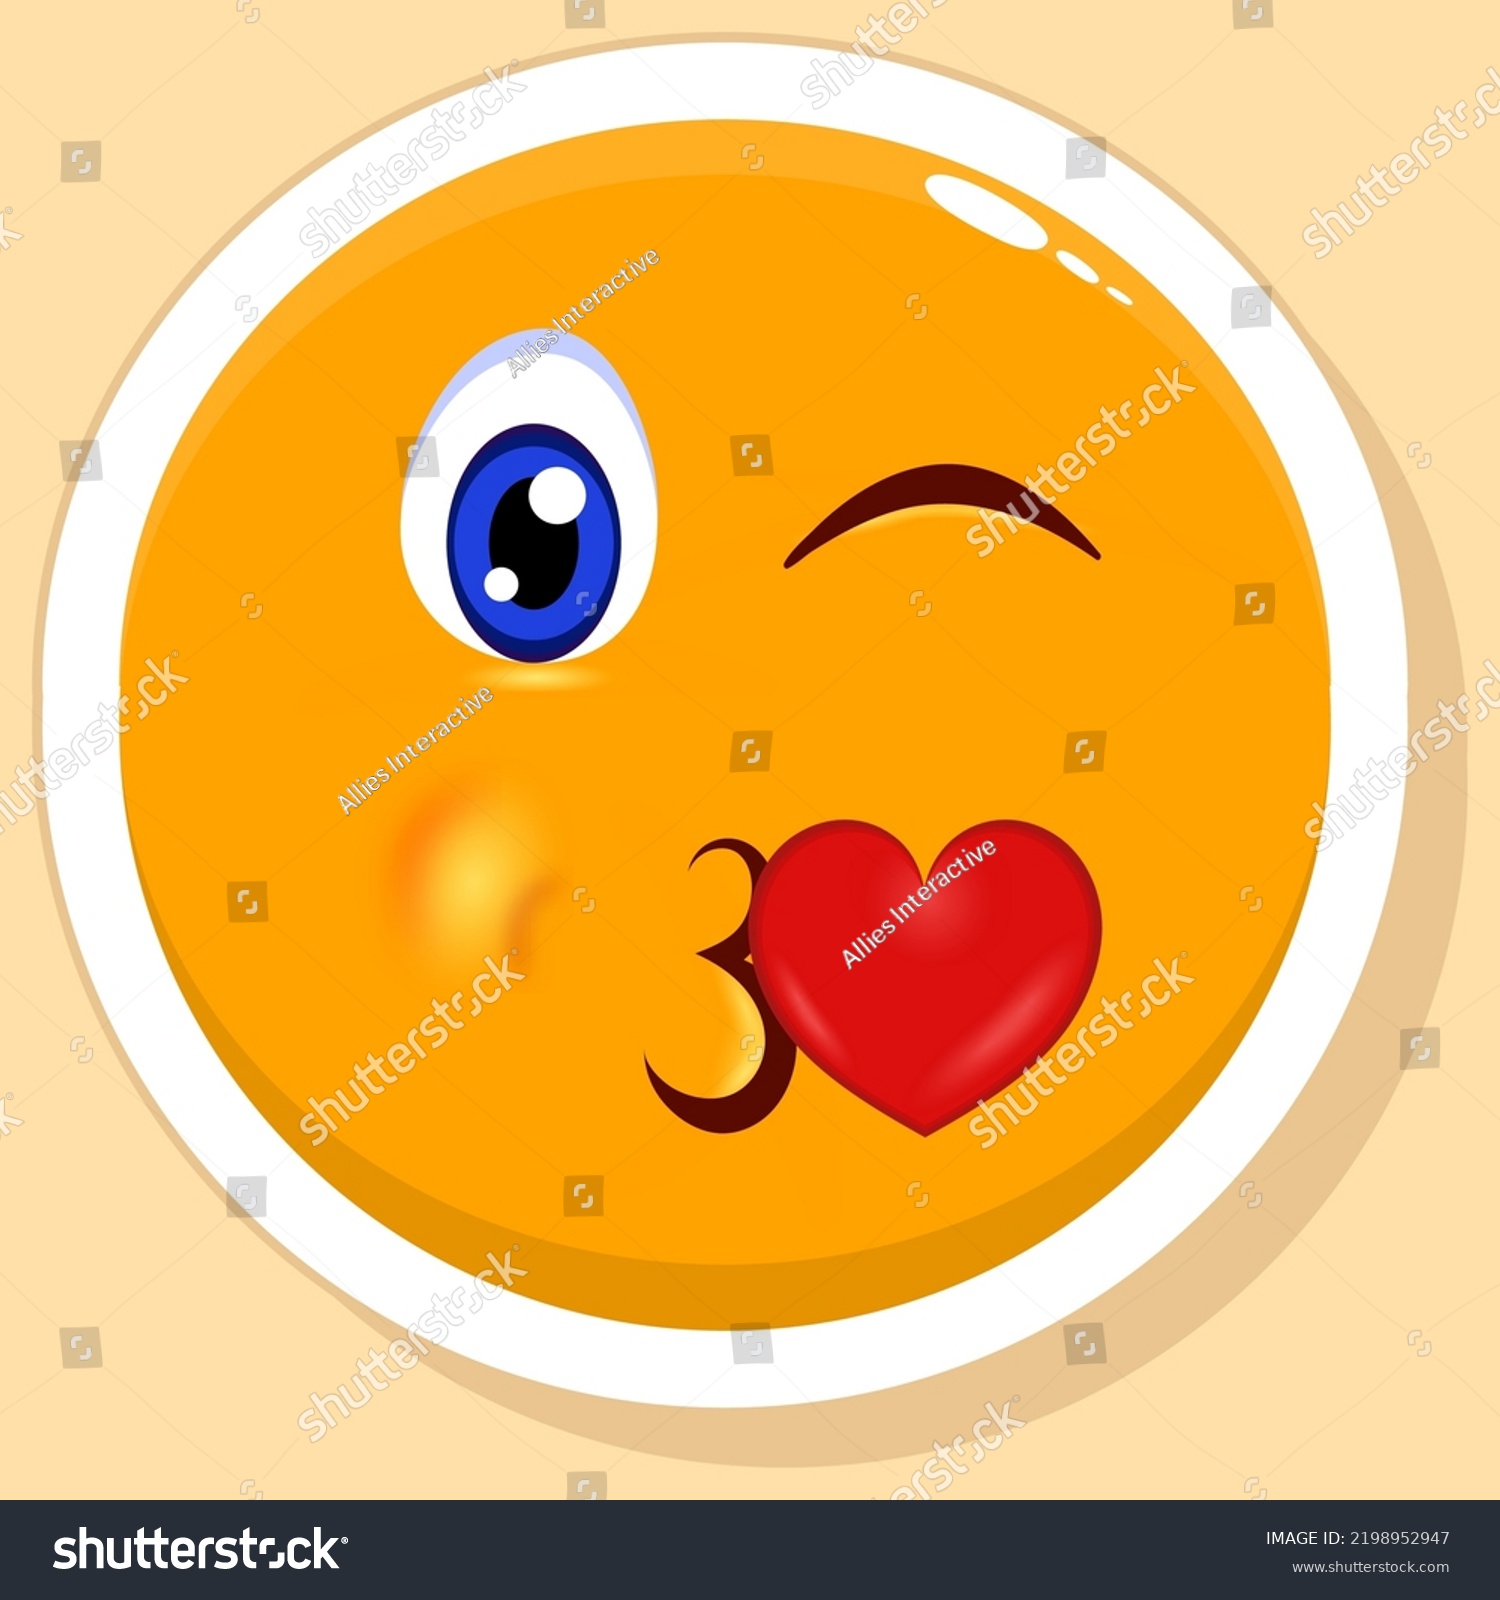 SVG of Sticker Style Face Blowing Kiss Emoji On Yellow Background. svg